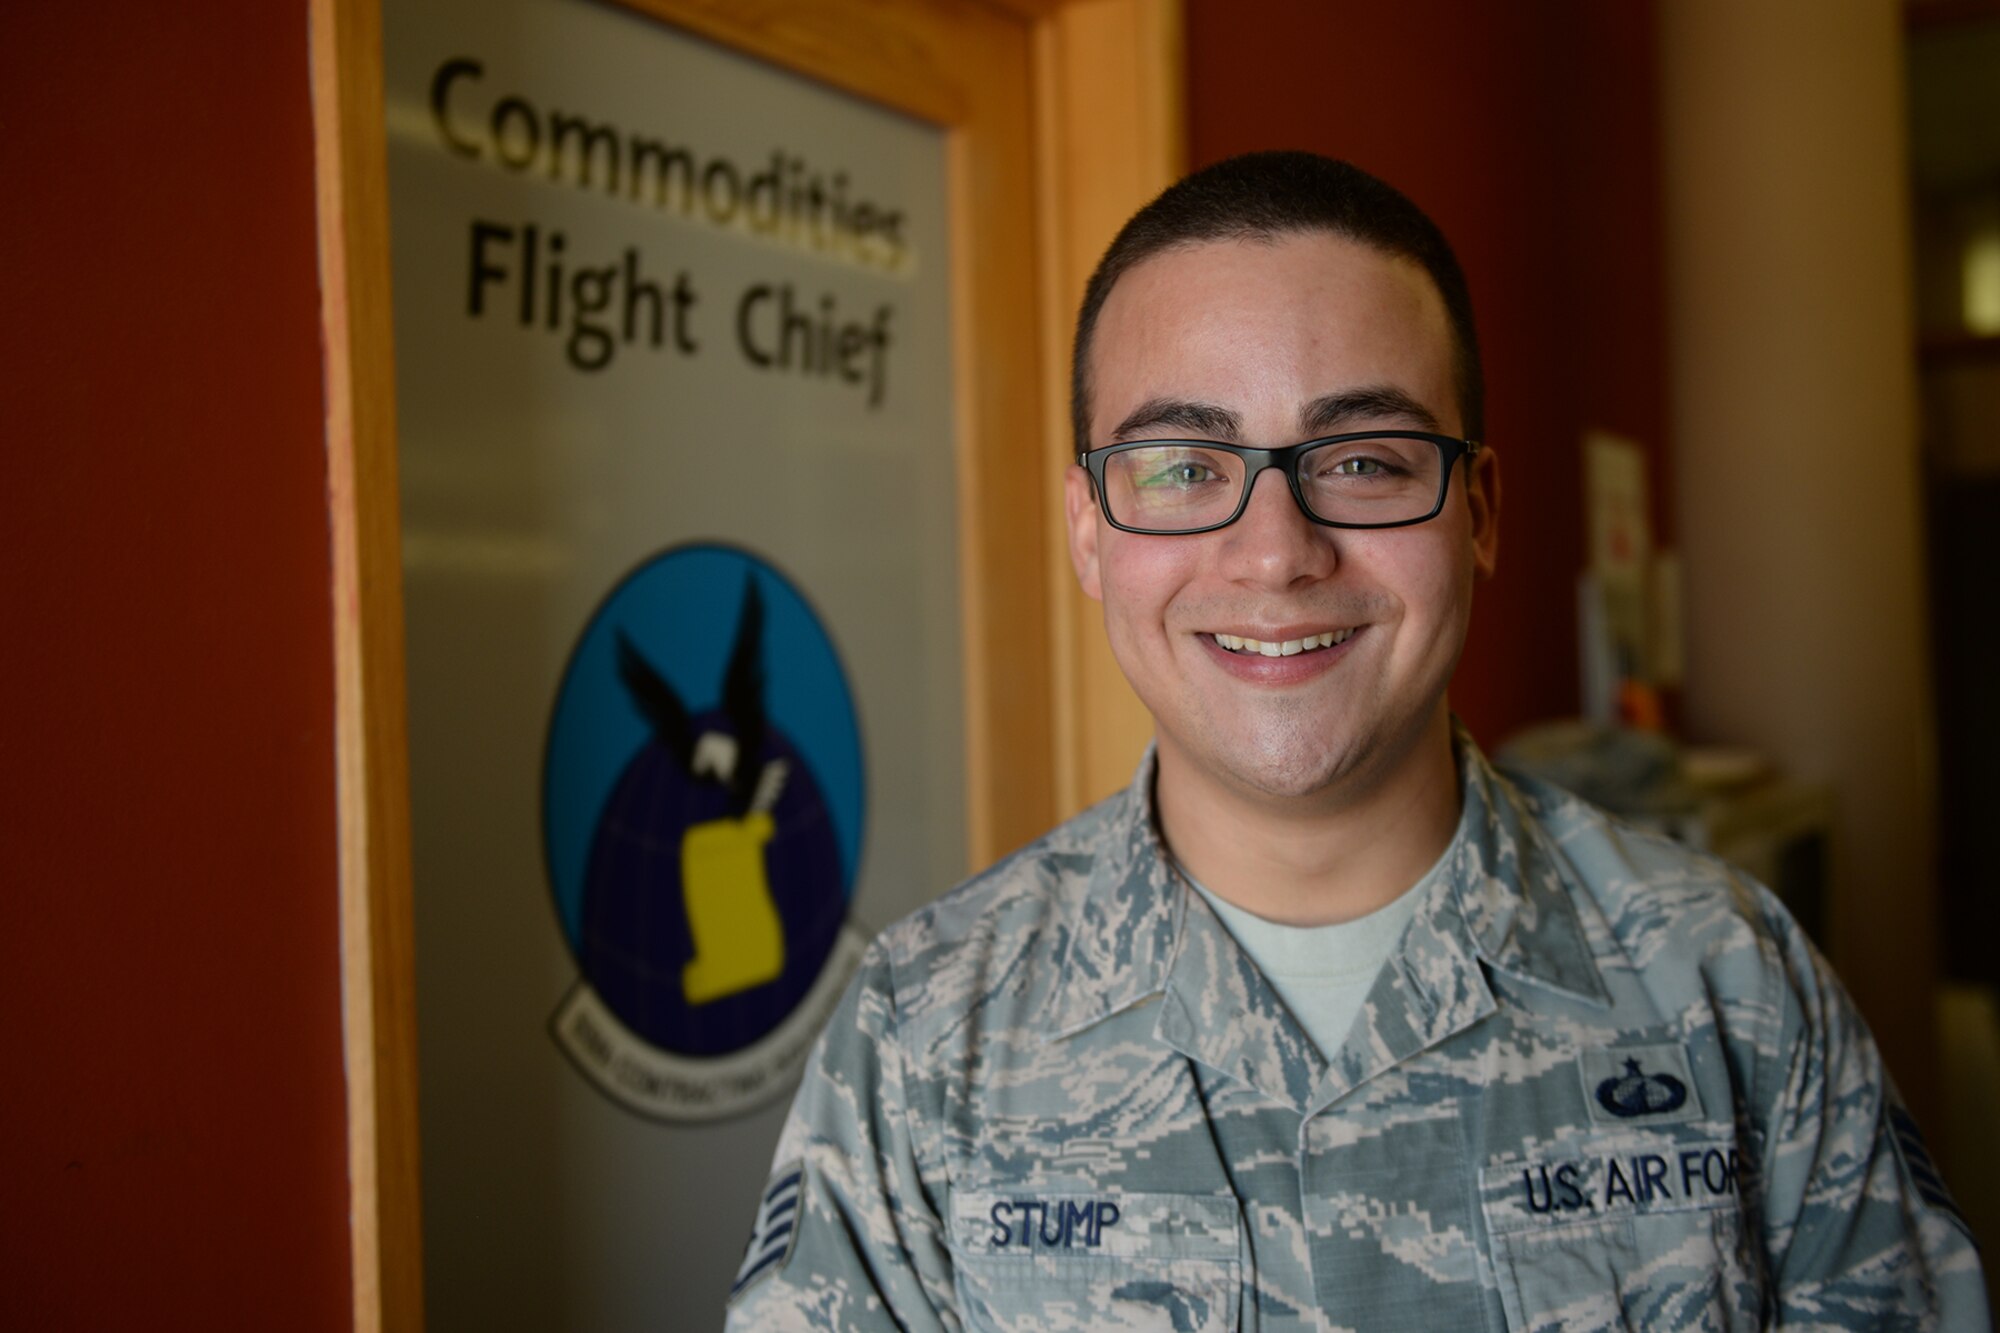 Staff Sgt. Luis Stump, 55th Contracting Squadron commodities flight chief, poses for a photo March 19, 2019, on Offutt Air Force Base, Neb. Stump led the contracting team to complete 22 contract actions totaling $650,000 during recent flood preparations. (U.S. Air Force photo by Tech. Sgt. Rachelle Blake)